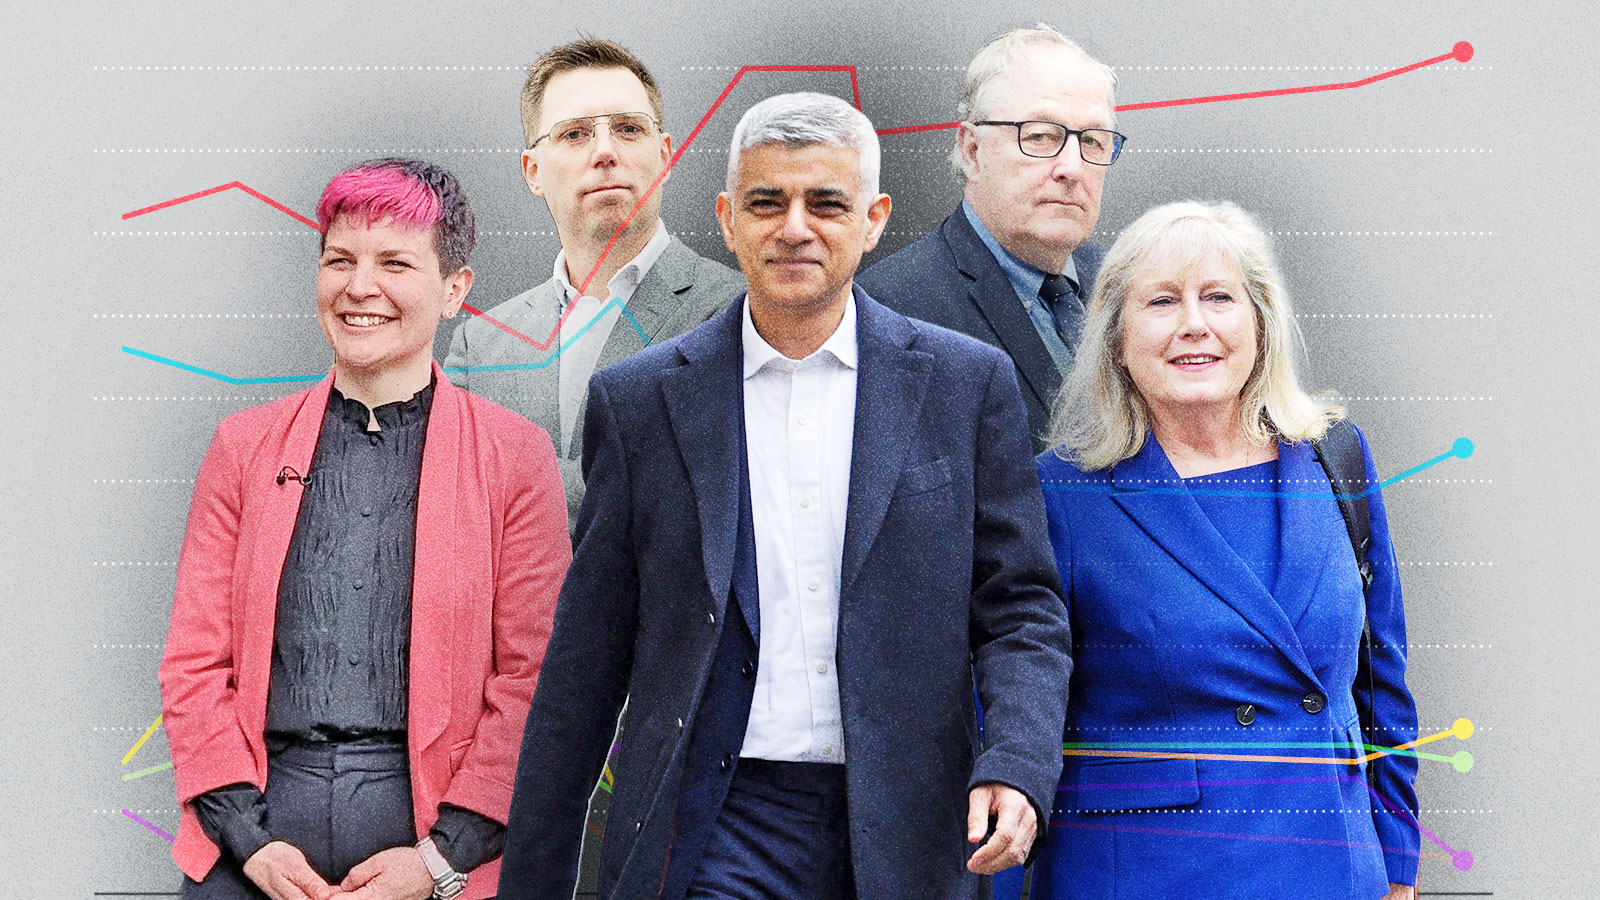 Candidates seeking to become mayor of London include, from left, Zoë Garbett, Rob Blackie, Sadiq Khan, Howard Cox and Susan Hall